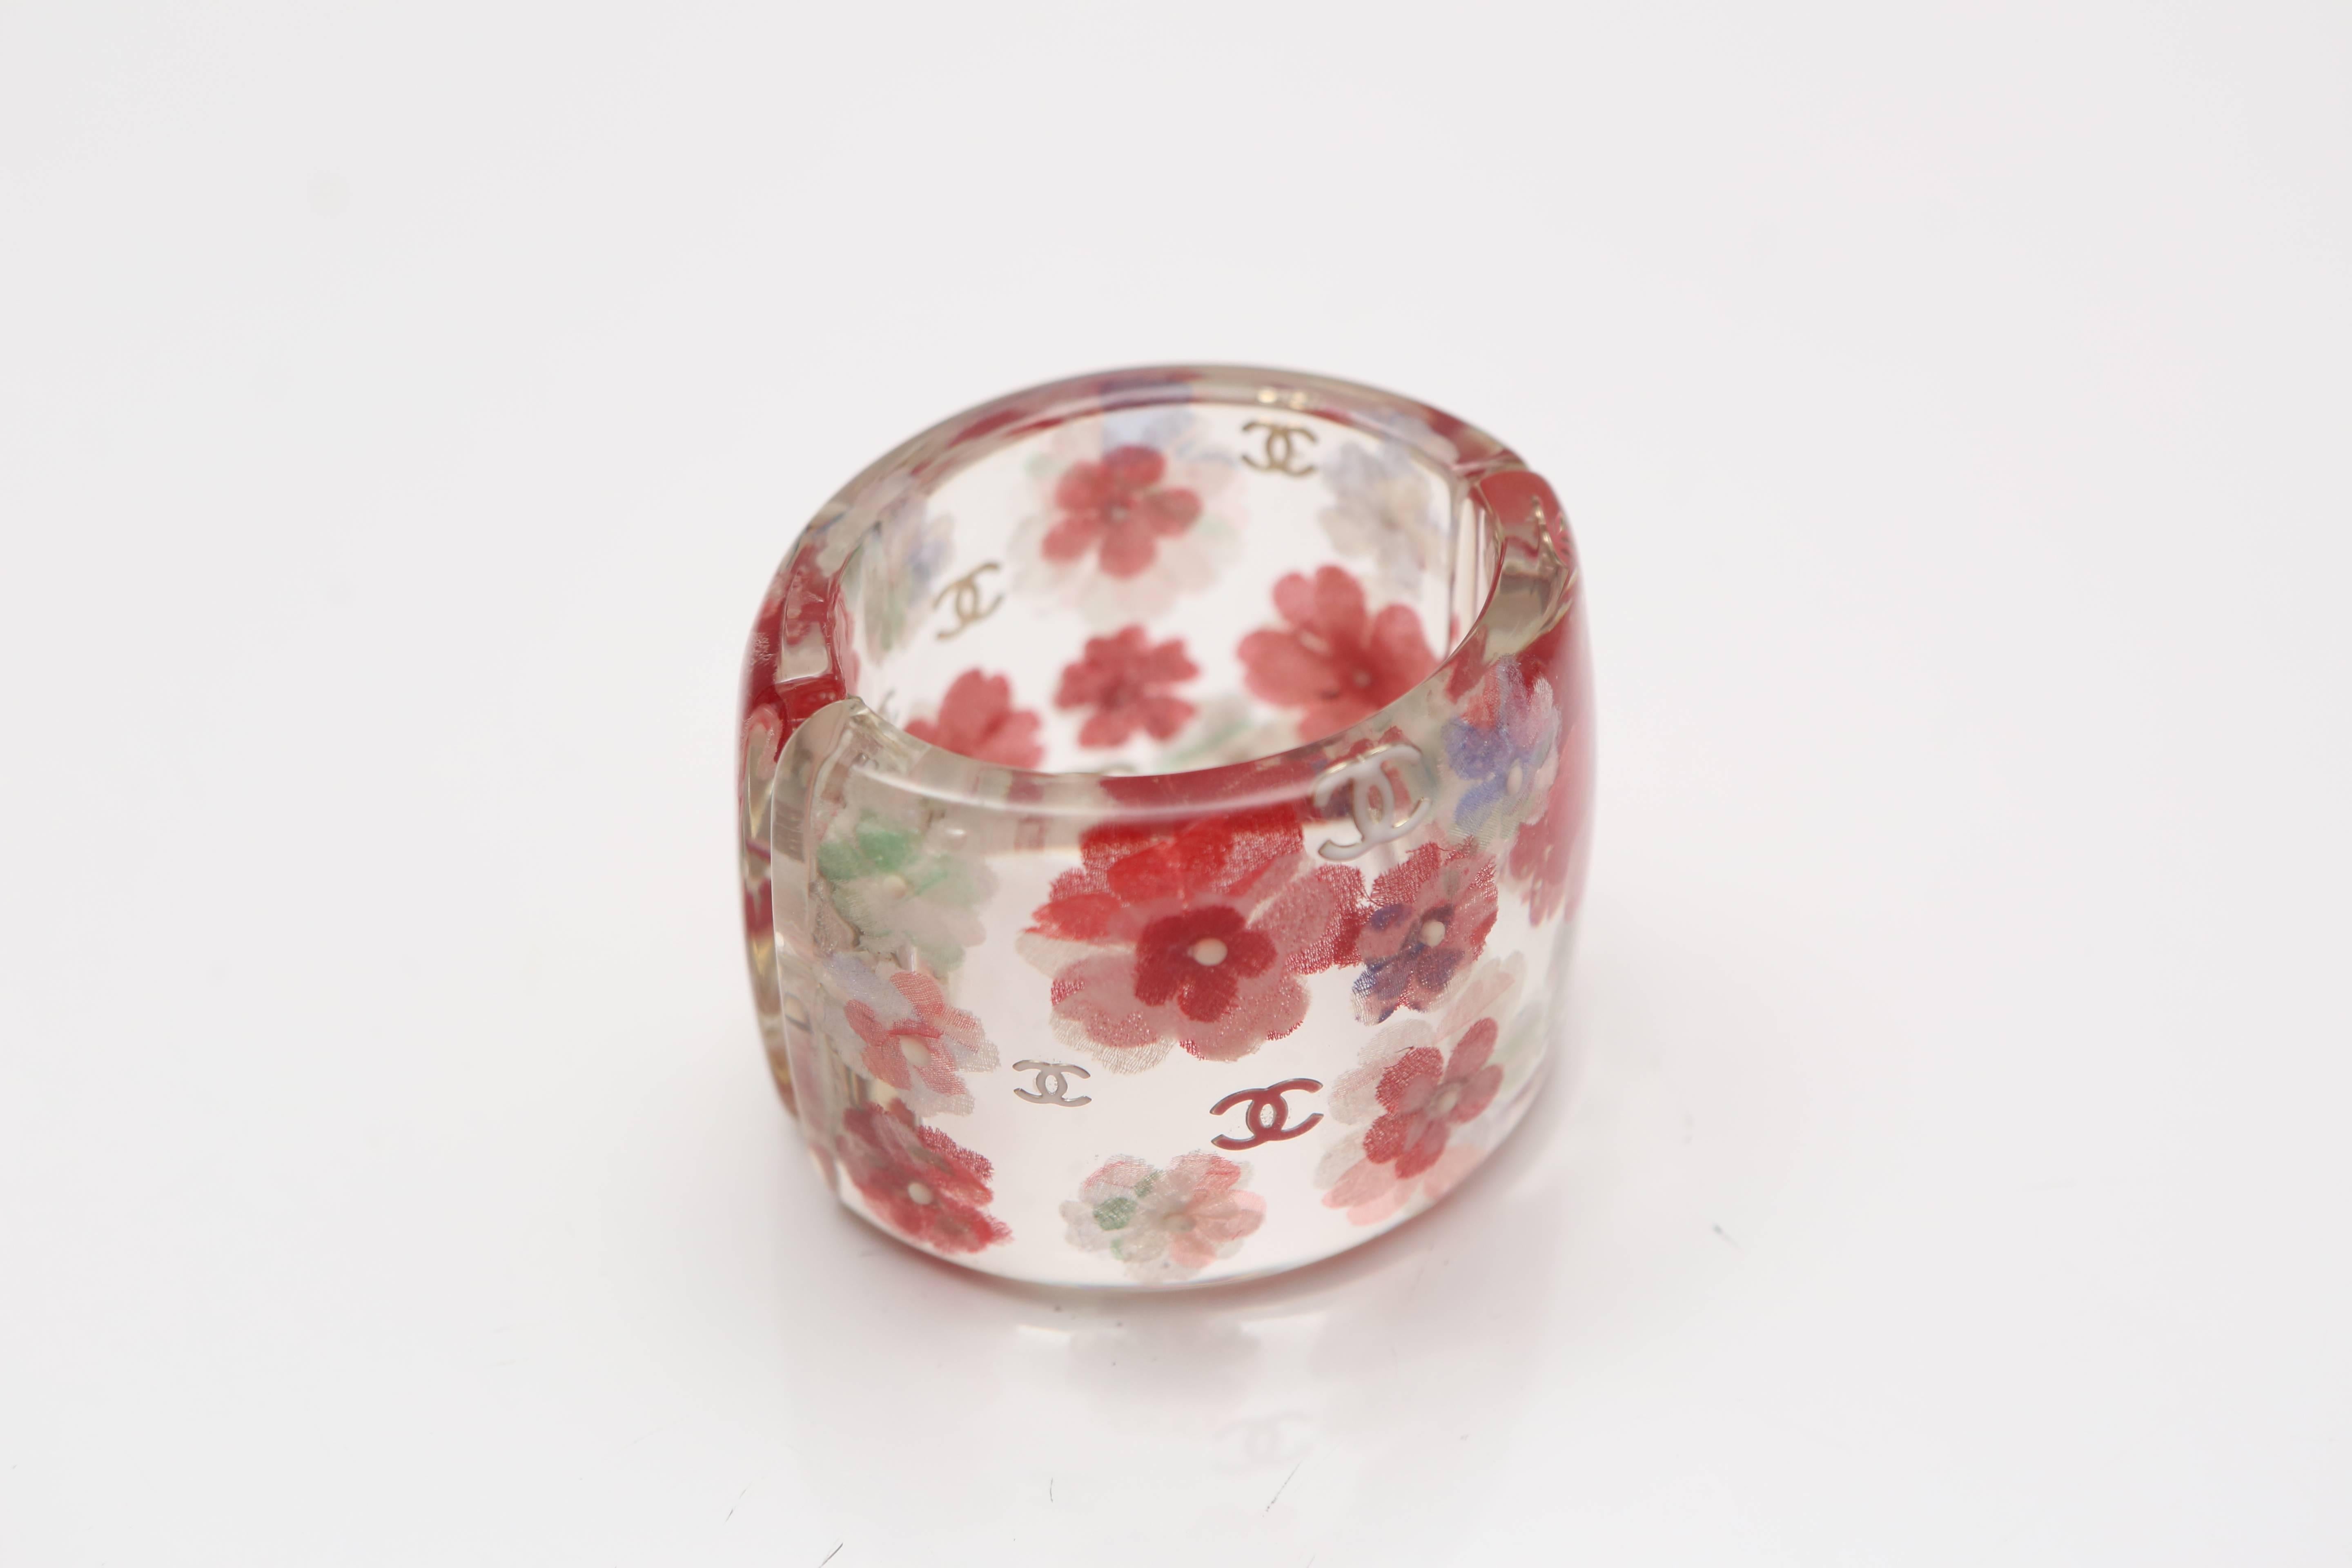 Lucite transparent cuff with red and white cut out flower detail and CC logo all over. 